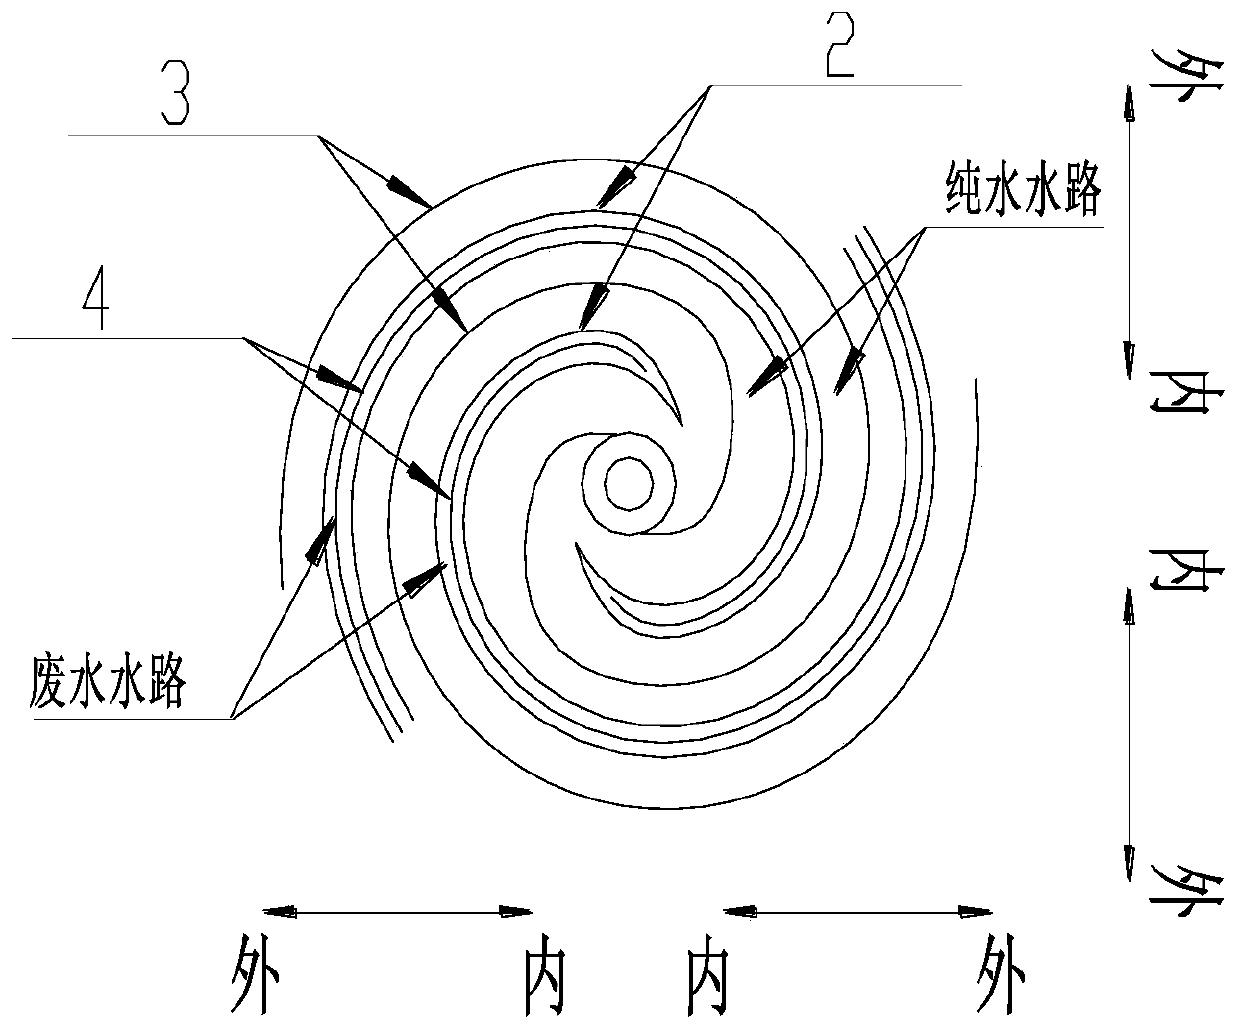 Spiral-wound membrane assembly, composite filter element assembly and water purification system